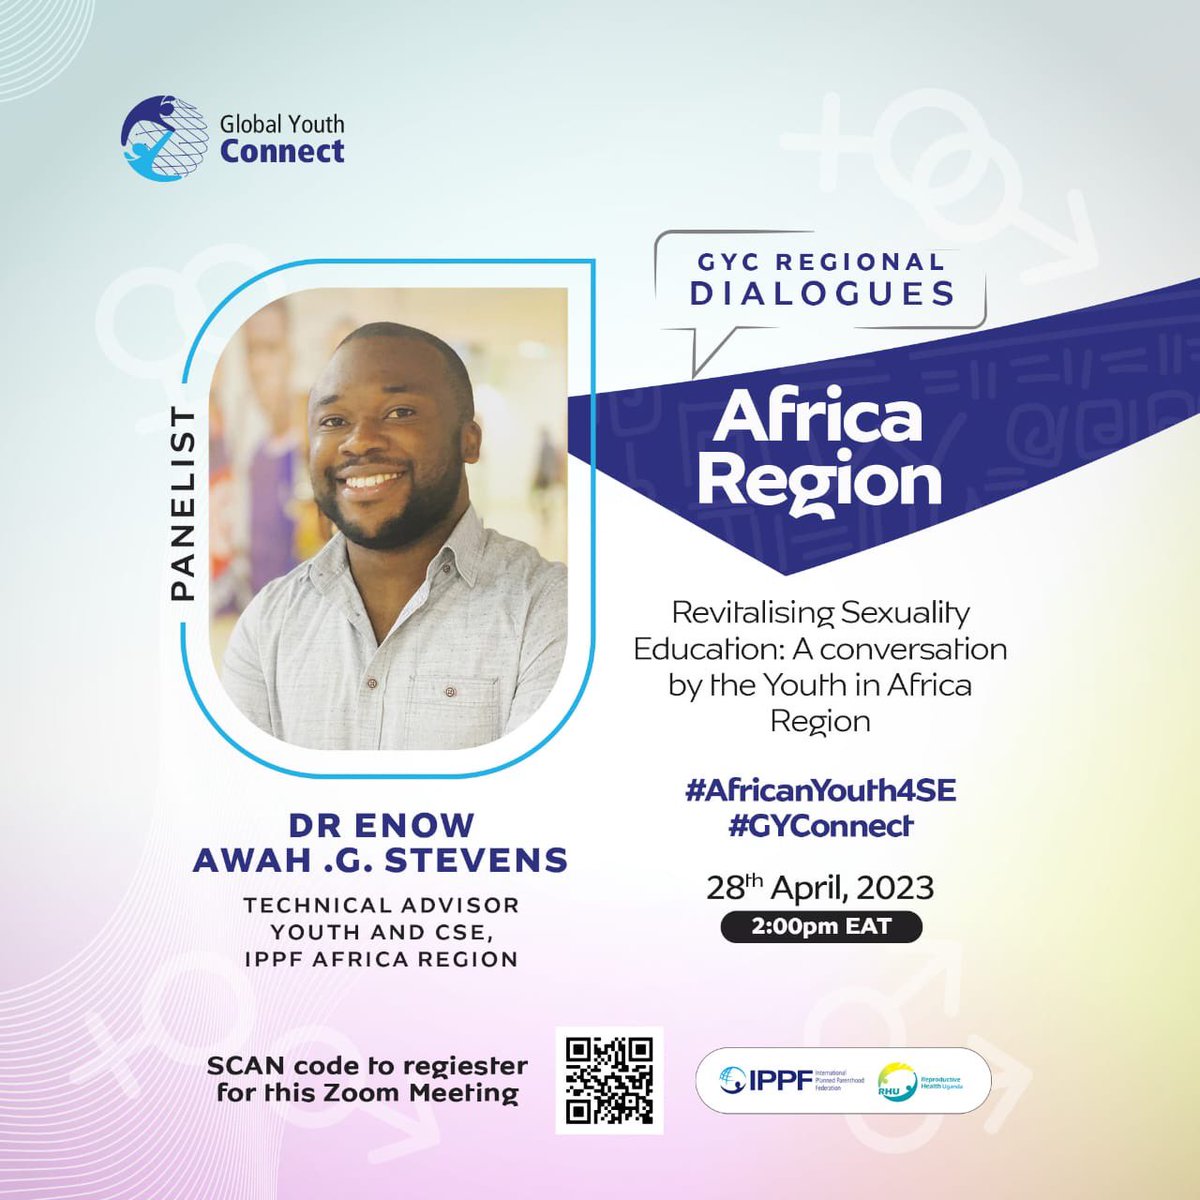 Will be speaking on the panel revitalizing #Sexuality Education in Africa! @IPPFAR @YouthDeliver @YouthConnektAf @AU_YouthEnvoy @AUYouthProgram @UNESCO_Dakar @CHOICEforYouth @SexualRights @ShareNetIntl @CHEVSAFRICA